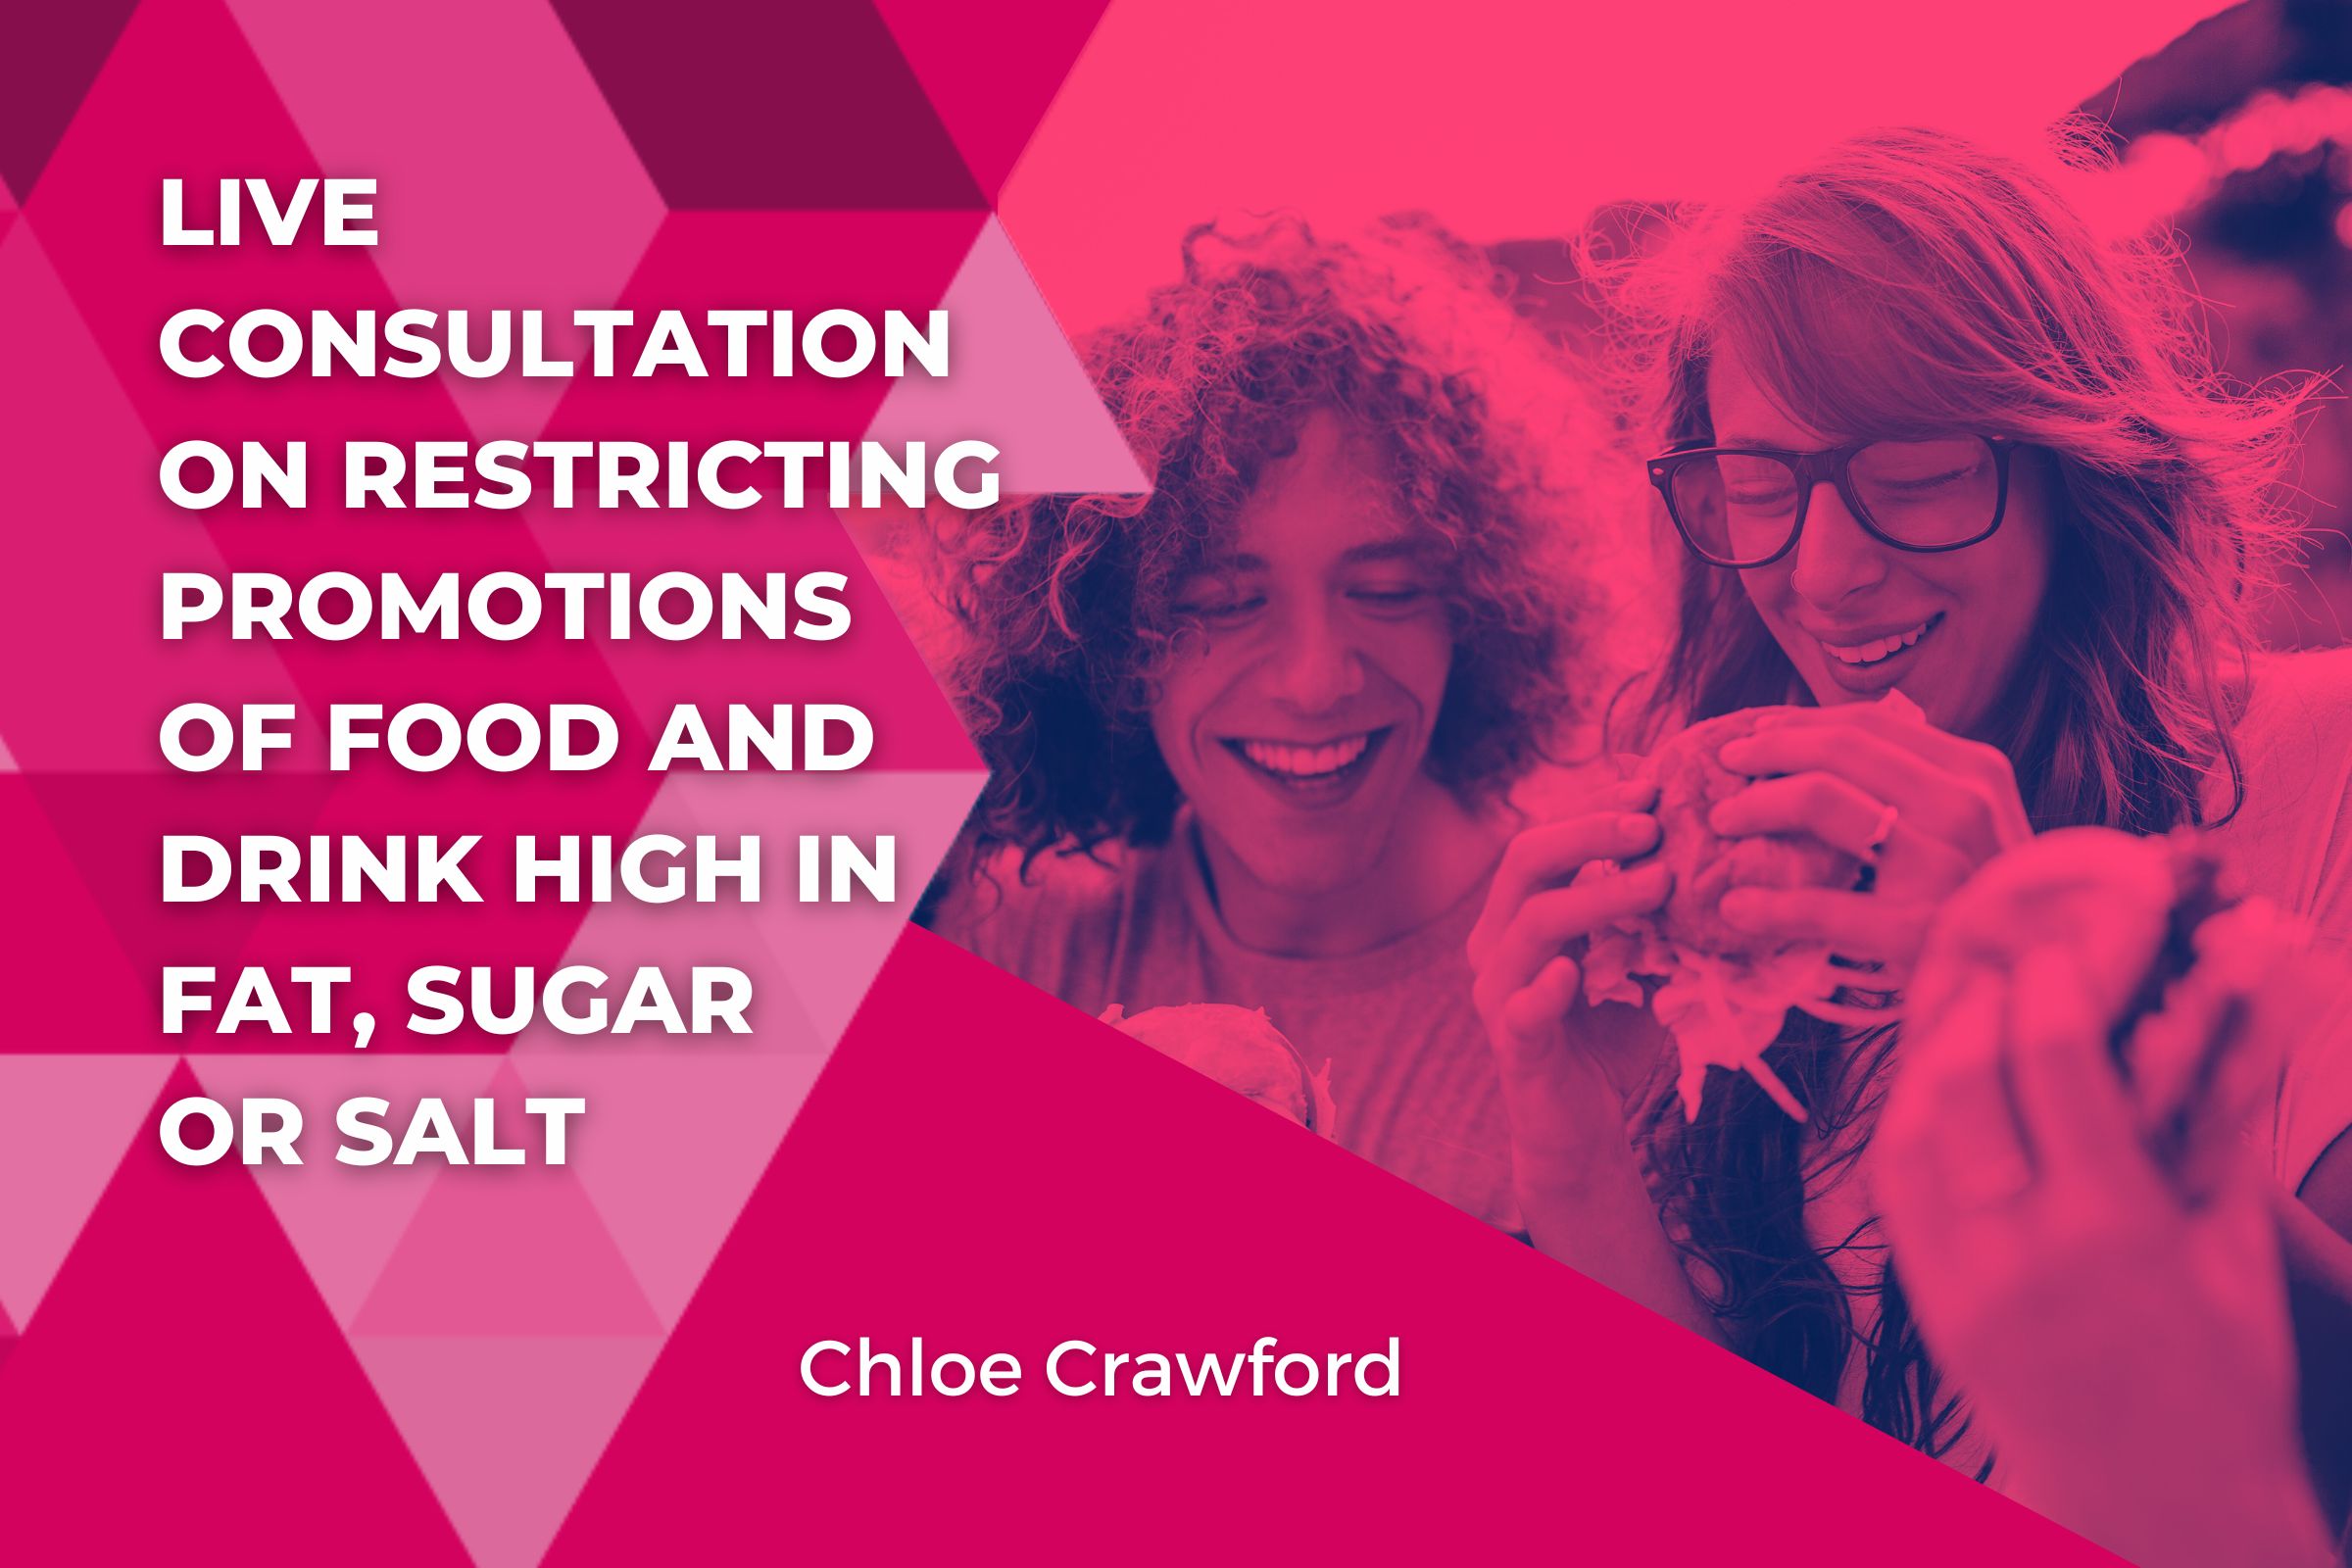 Live Consultation on Restricting Promotions of Food and Drink High in Fat, Sugar or Salt – How Does This Affect the Licensed Trade?